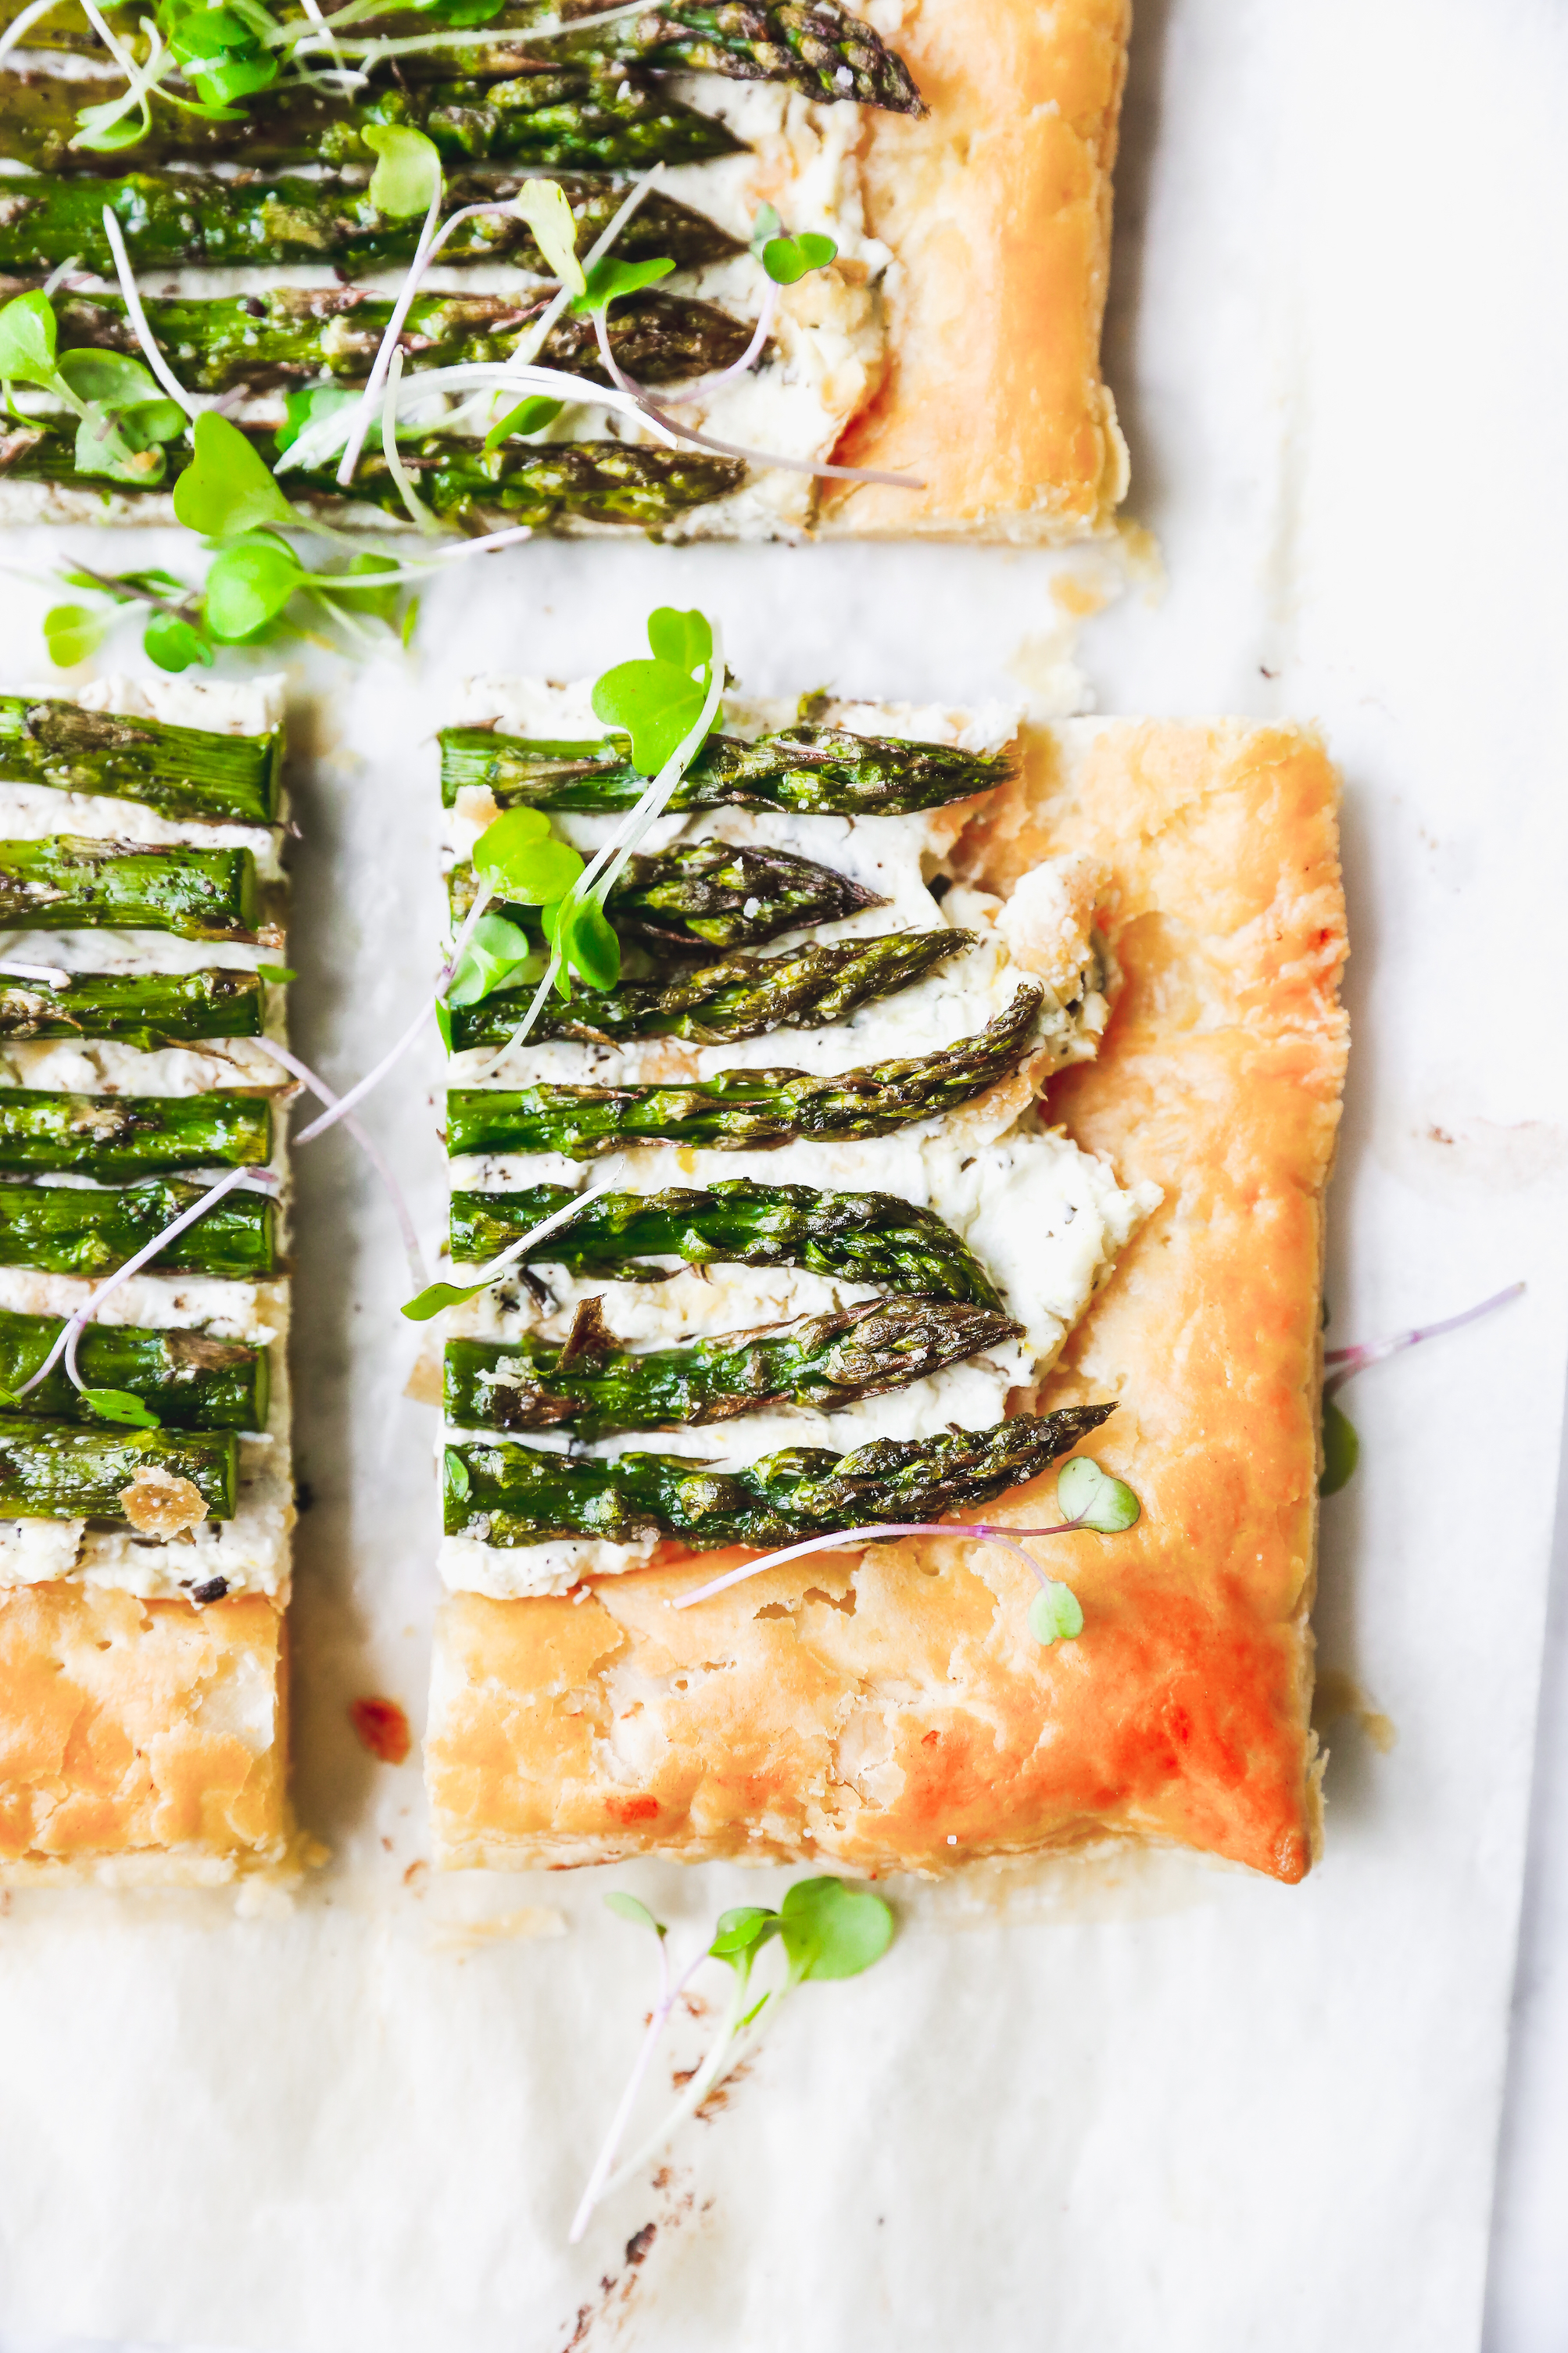 Roasted Asparagus & Goat Cheese Tart - Yes to Yolks